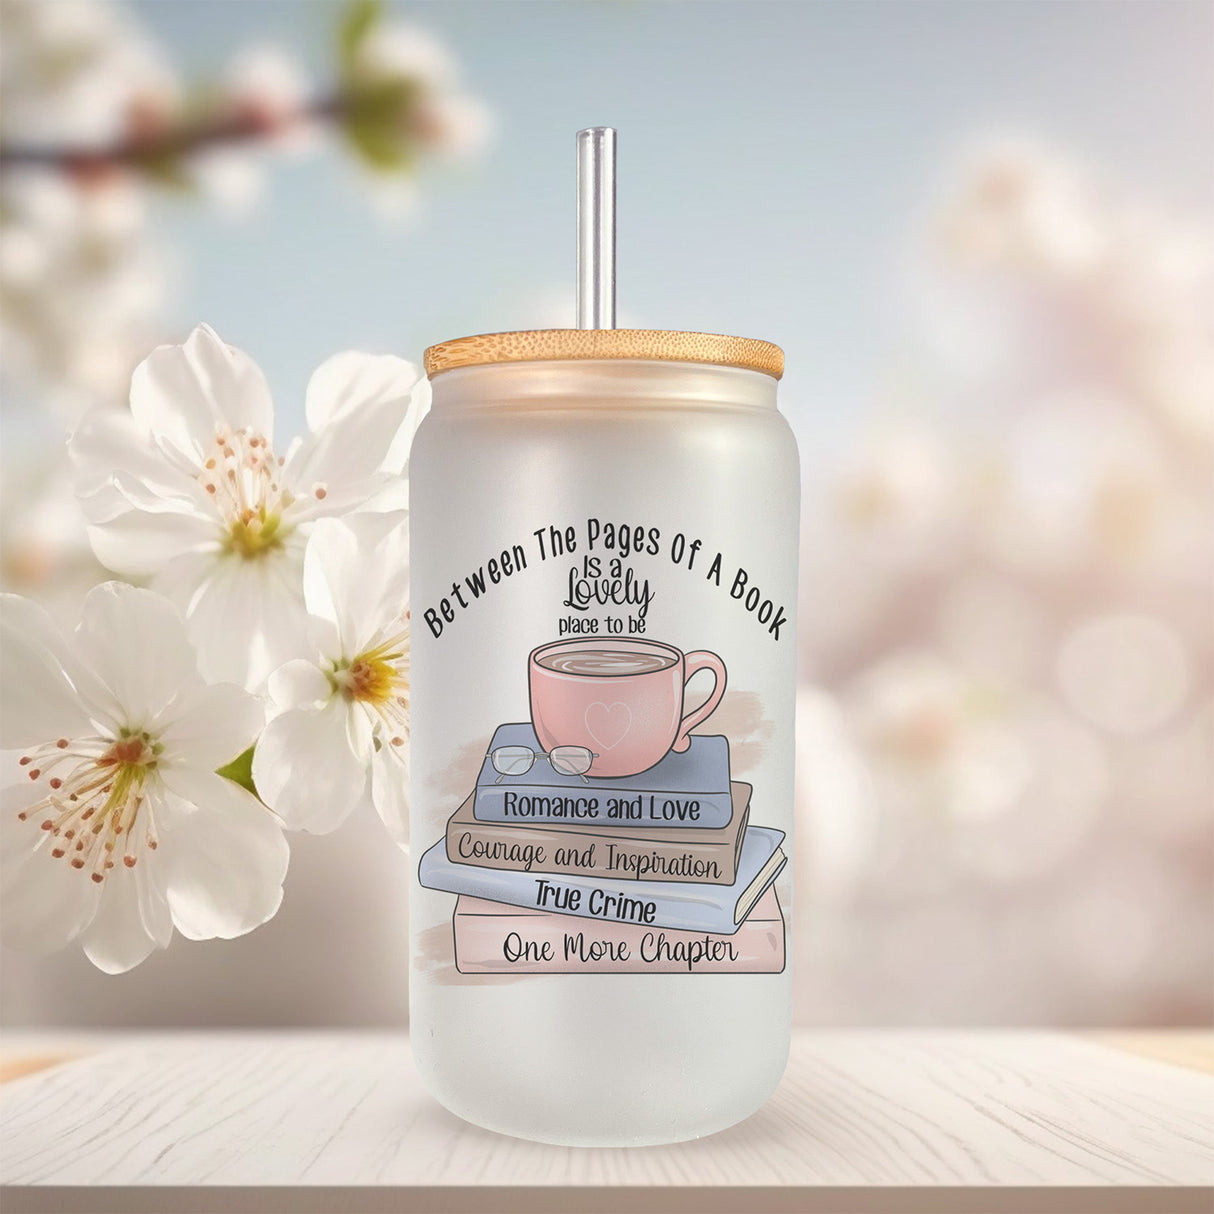 Cute gifts for book lovers. 16oz frosted iced coffee glass tumblers for book lovers. The cup design mentions a few book genre favorites like romance and love, true crime, and courage and inspiration. Cute one more chapter iced coffee cup.